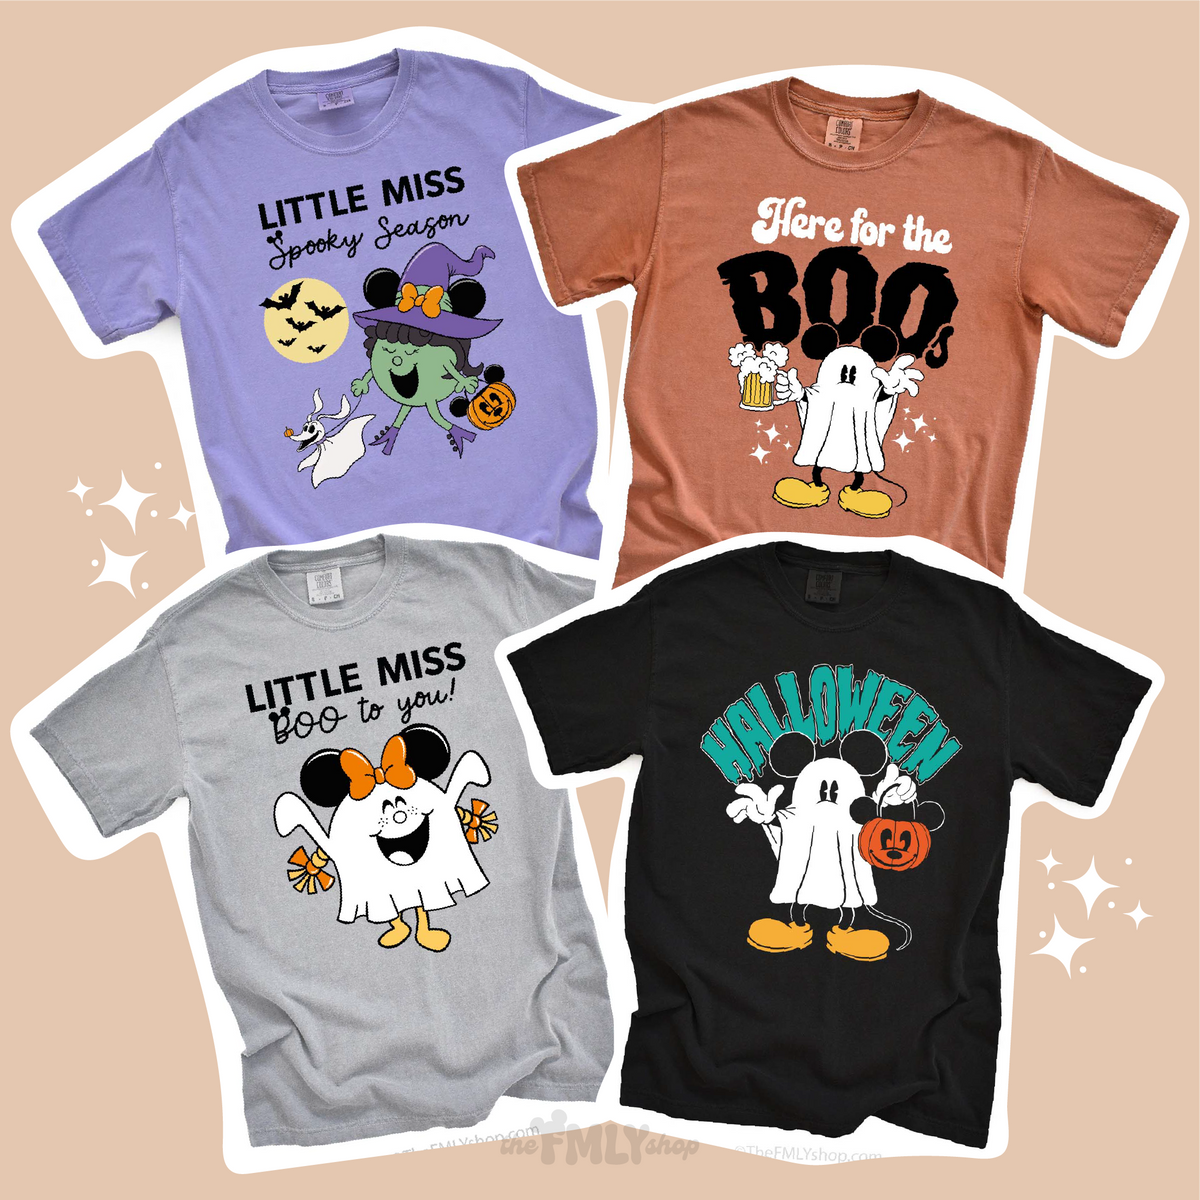 Little Miss Boo to you Tee